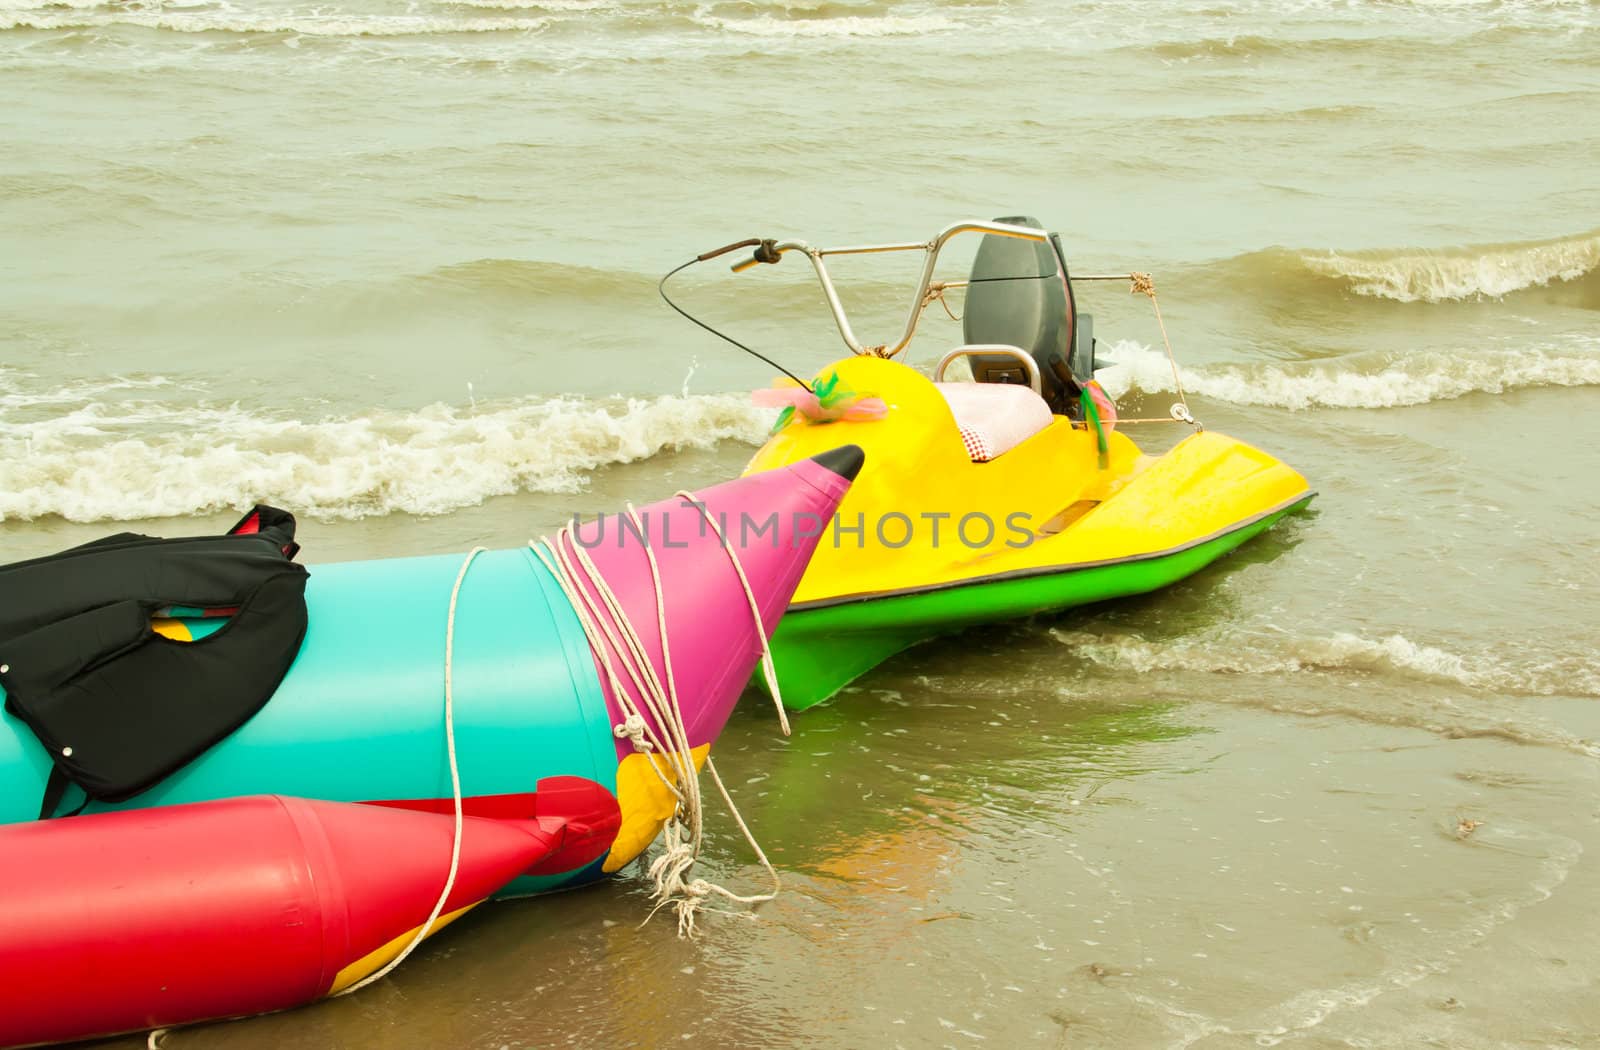 Banana boat on beach For tourists coming to play.